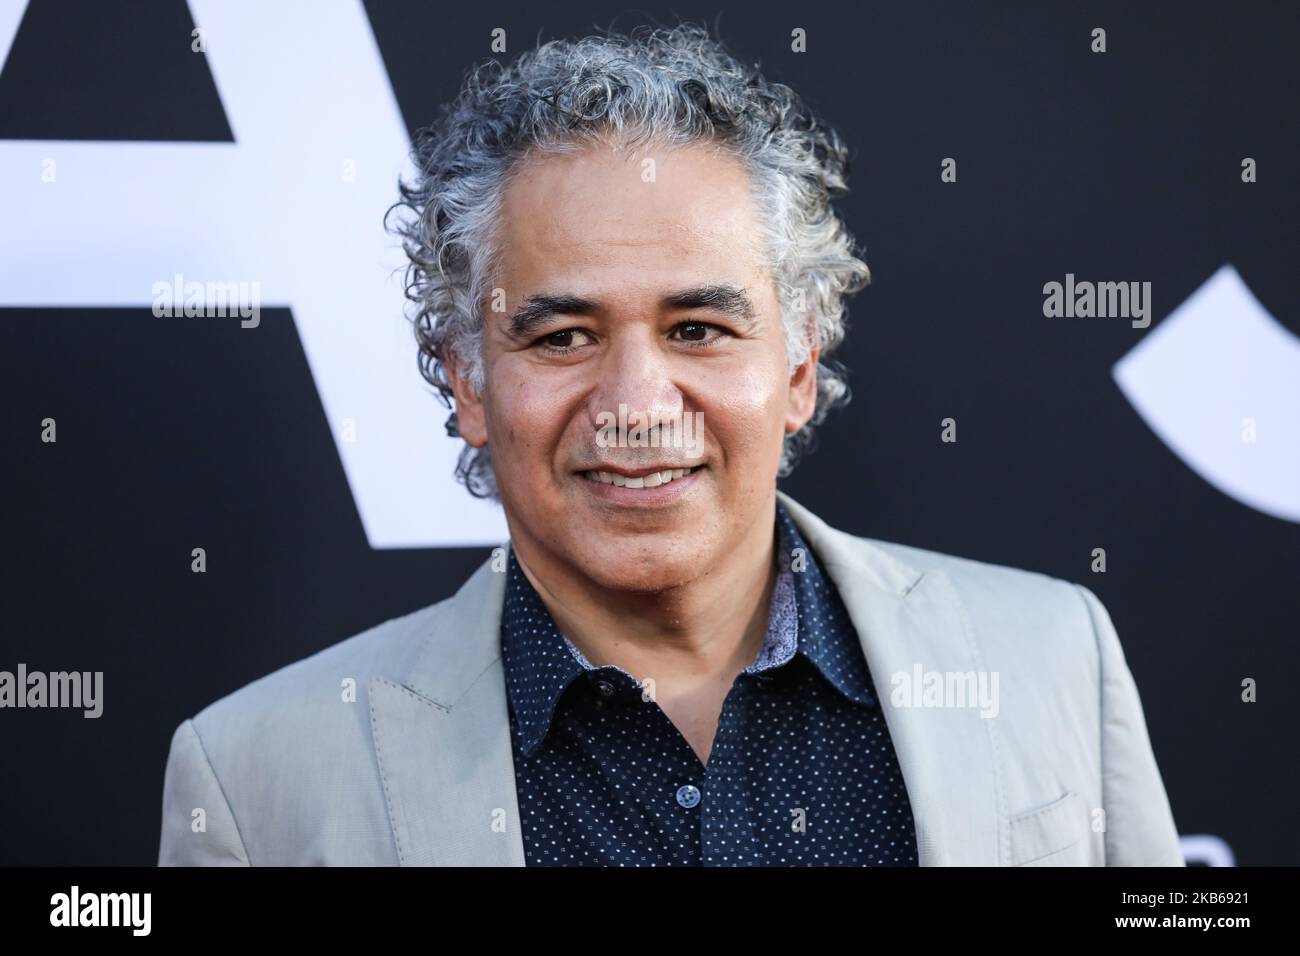 HOLLYWOOD, LOS ANGELES, CALIFORNIA, USA - SEPTEMBER 18: Actor John Ortiz arrives at the Los Angeles Premiere Of 20th Century Fox's 'Ad Astra' held at ArcLight Cinemas Hollywood Cinerama Dome on August 18, 2019 in Hollywood, Los Angeles, California, United States. (Photo by Xavier Collin/Image Press Agency/NurPhoto) Stock Photo